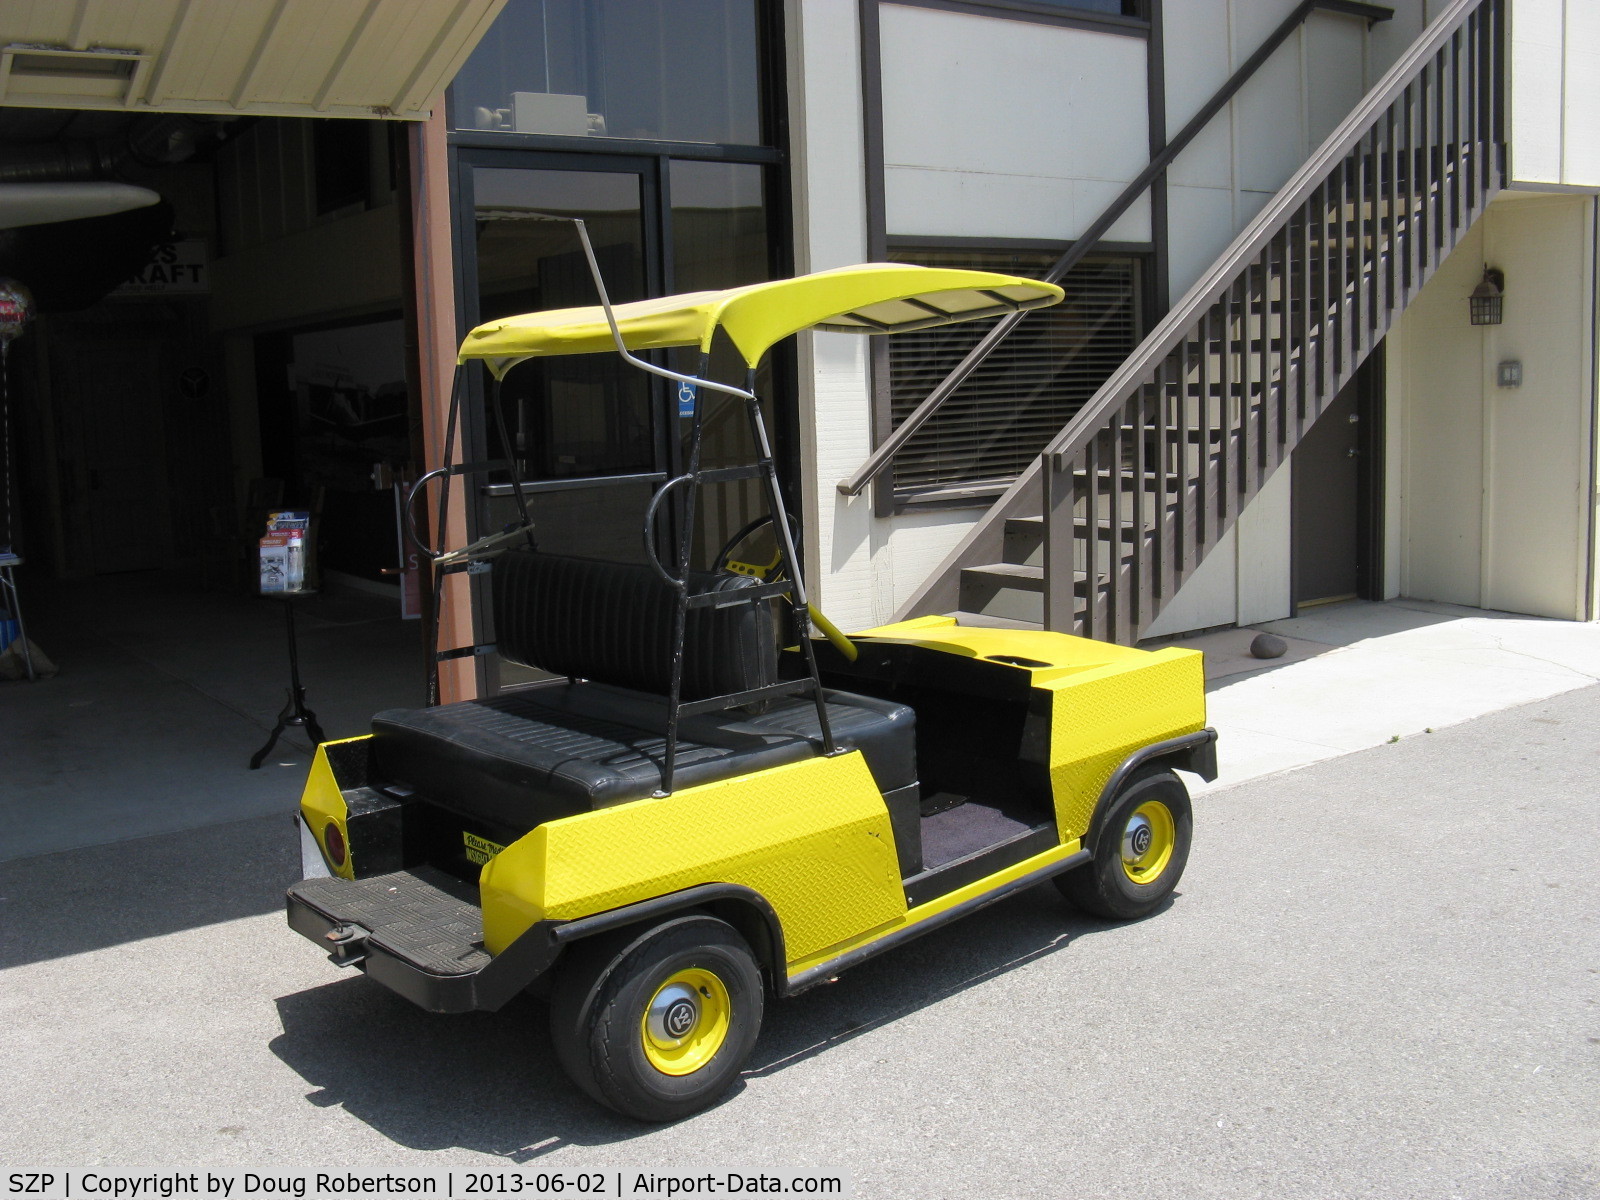 Santa Paula Airport (SZP) - The airport has many forms of personal ground transport. Here is an electric vehicle that can cleverly seat four.